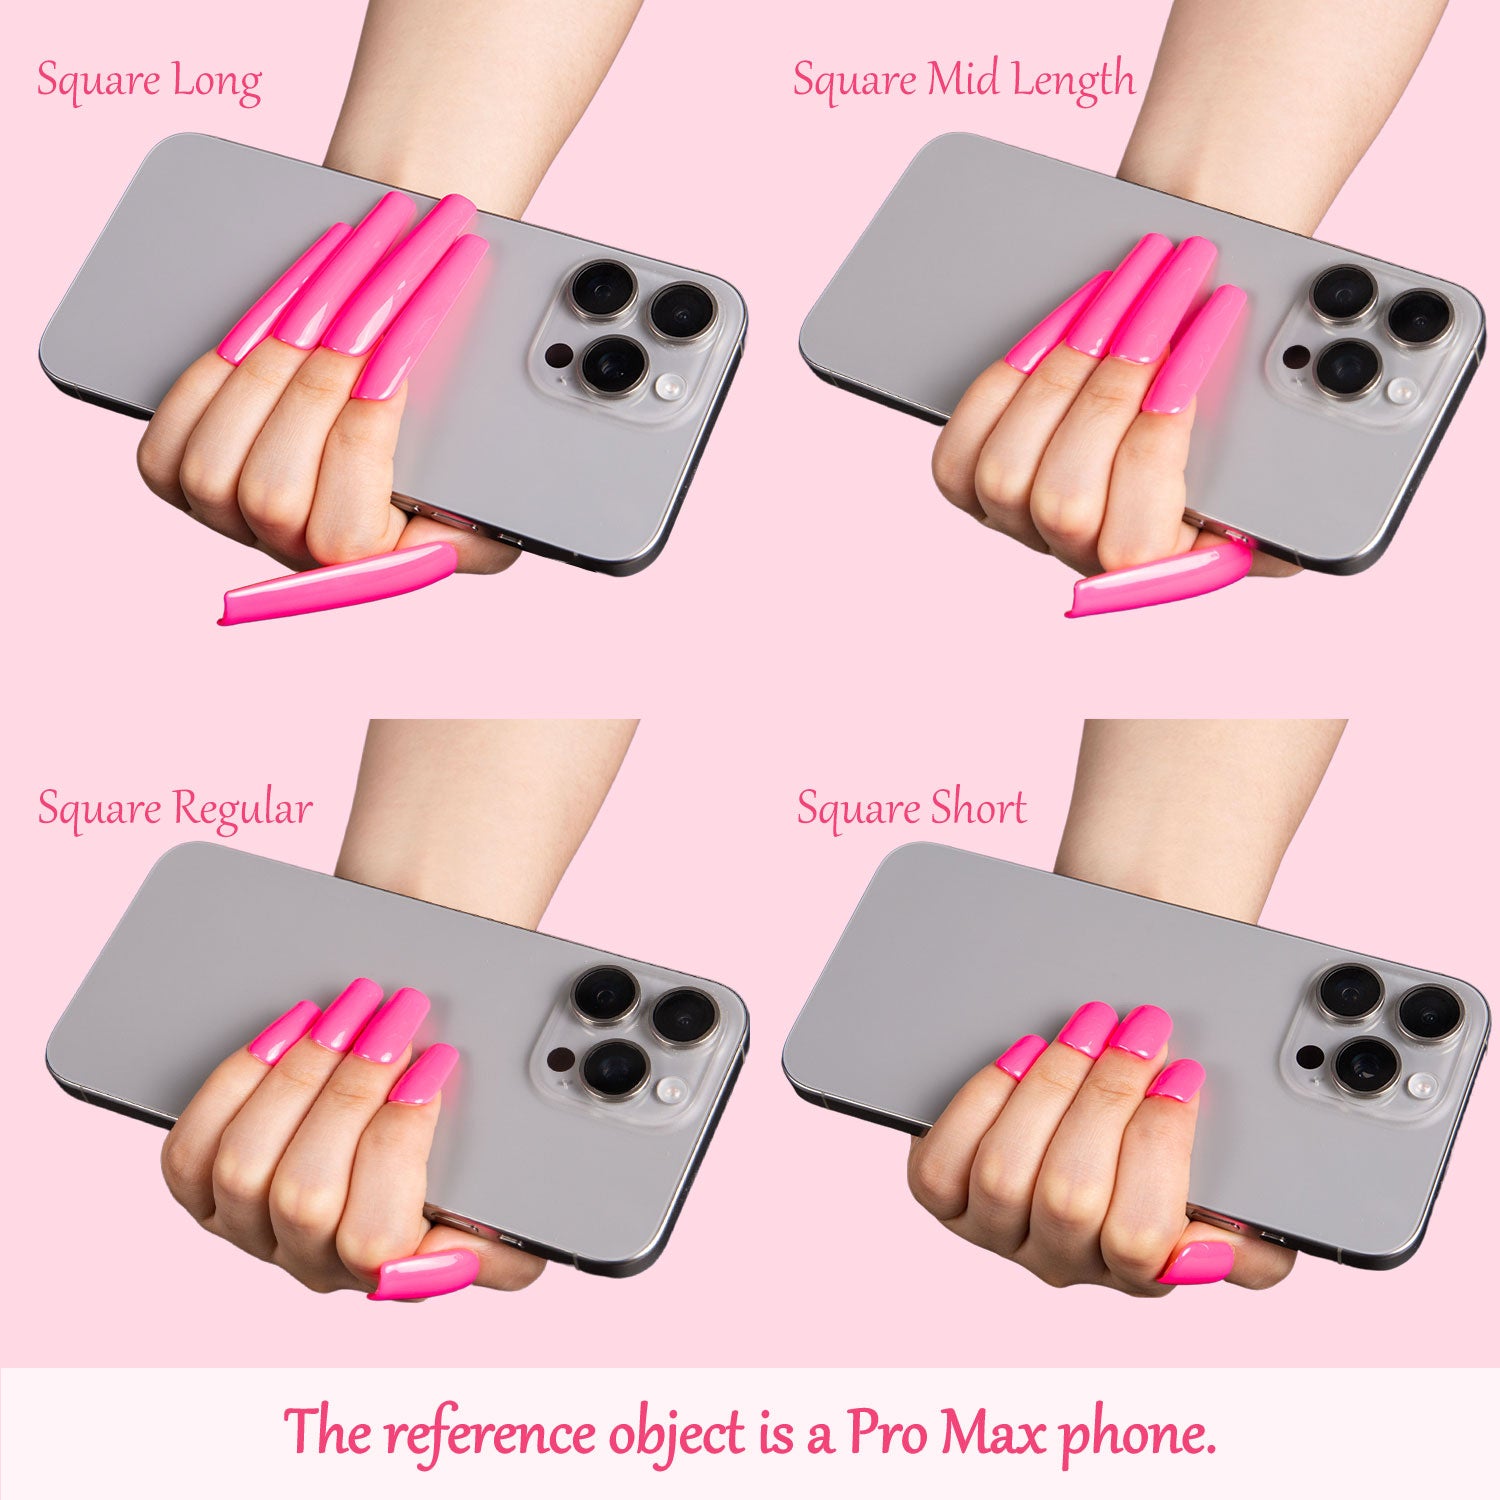 Comparison of four different square nail lengths (Square Long, Square Mid Length, Square Regular, Square Short) holding a Pro Max phone in pink background, showcasing pink painted nails.